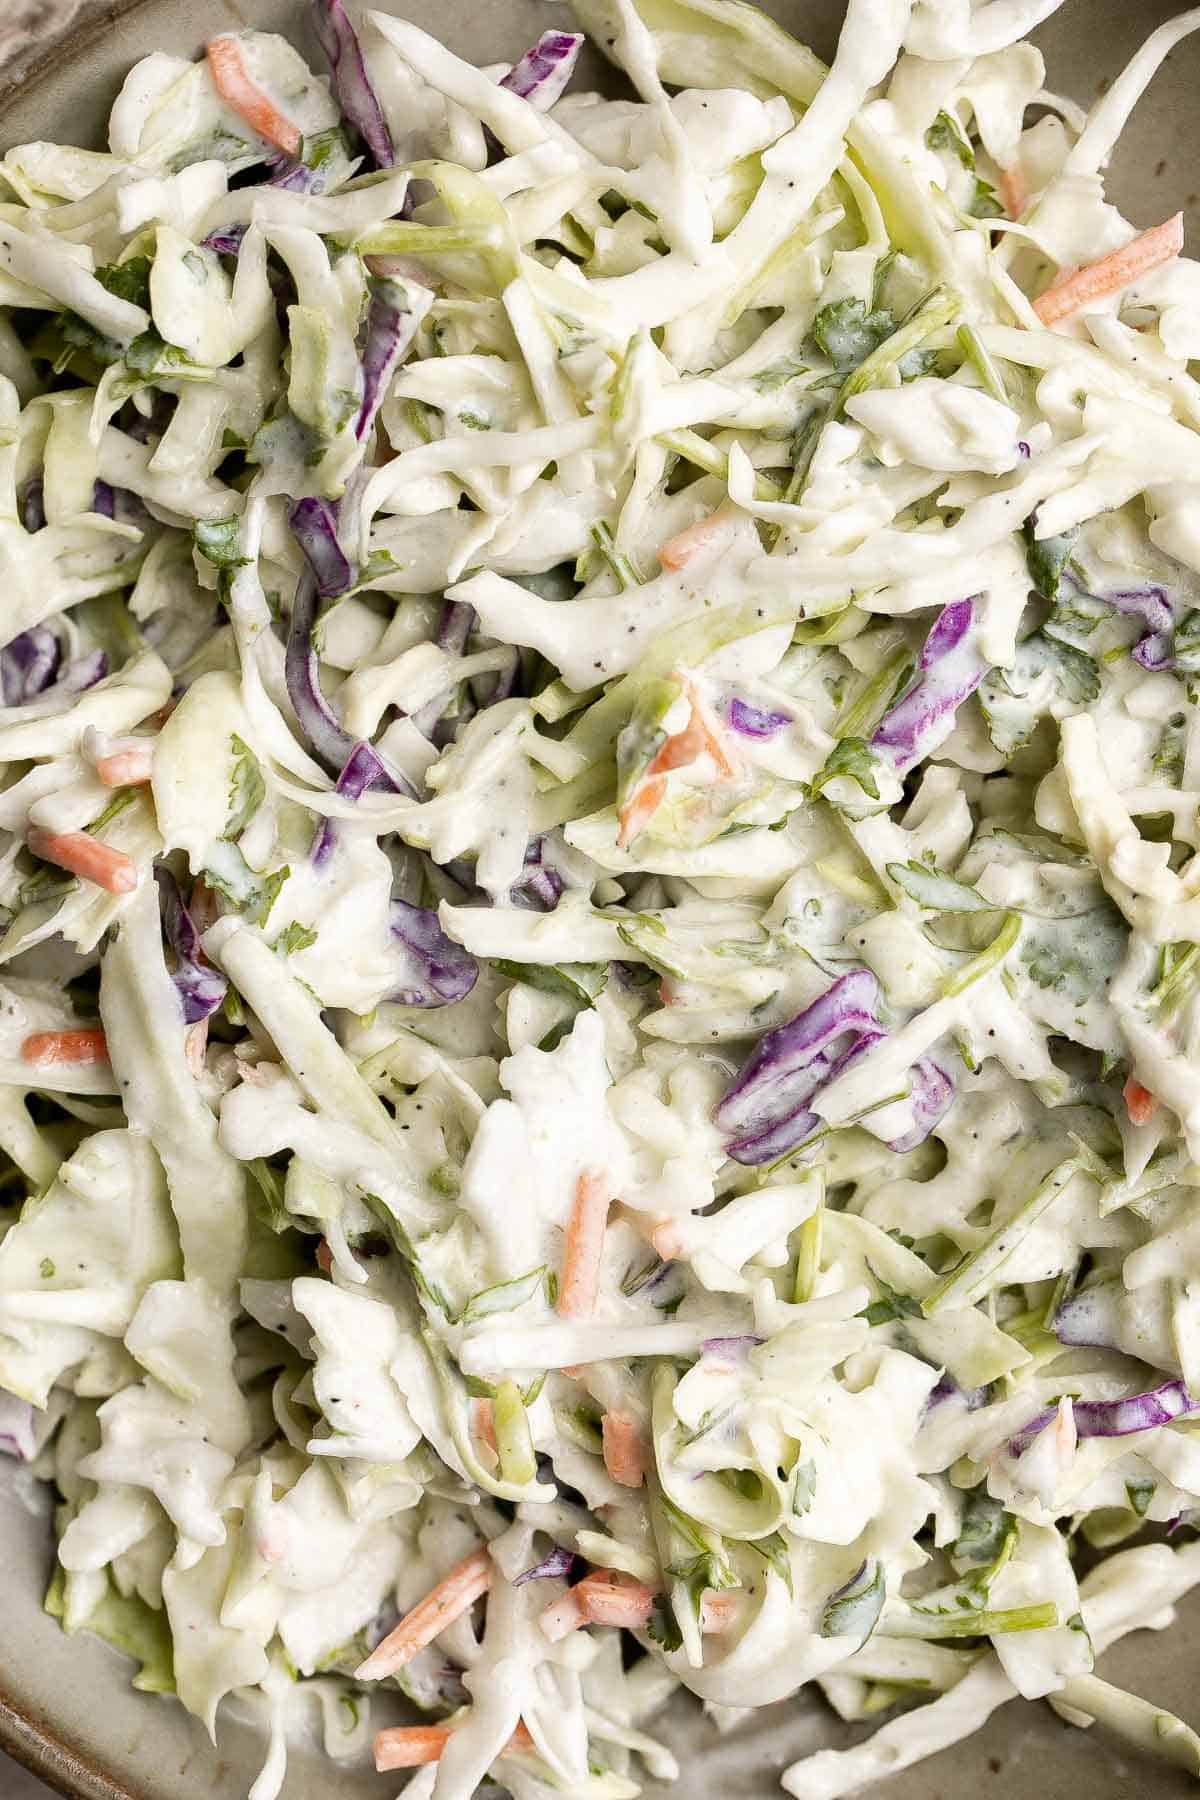 Cilantro lime slaw is fresh, light, crunchy, and zesty. Ready in 5 minutes, it’s the perfect pairing for tacos, burgers, sandwiches, and barbecued meats. | aheadofthyme.com